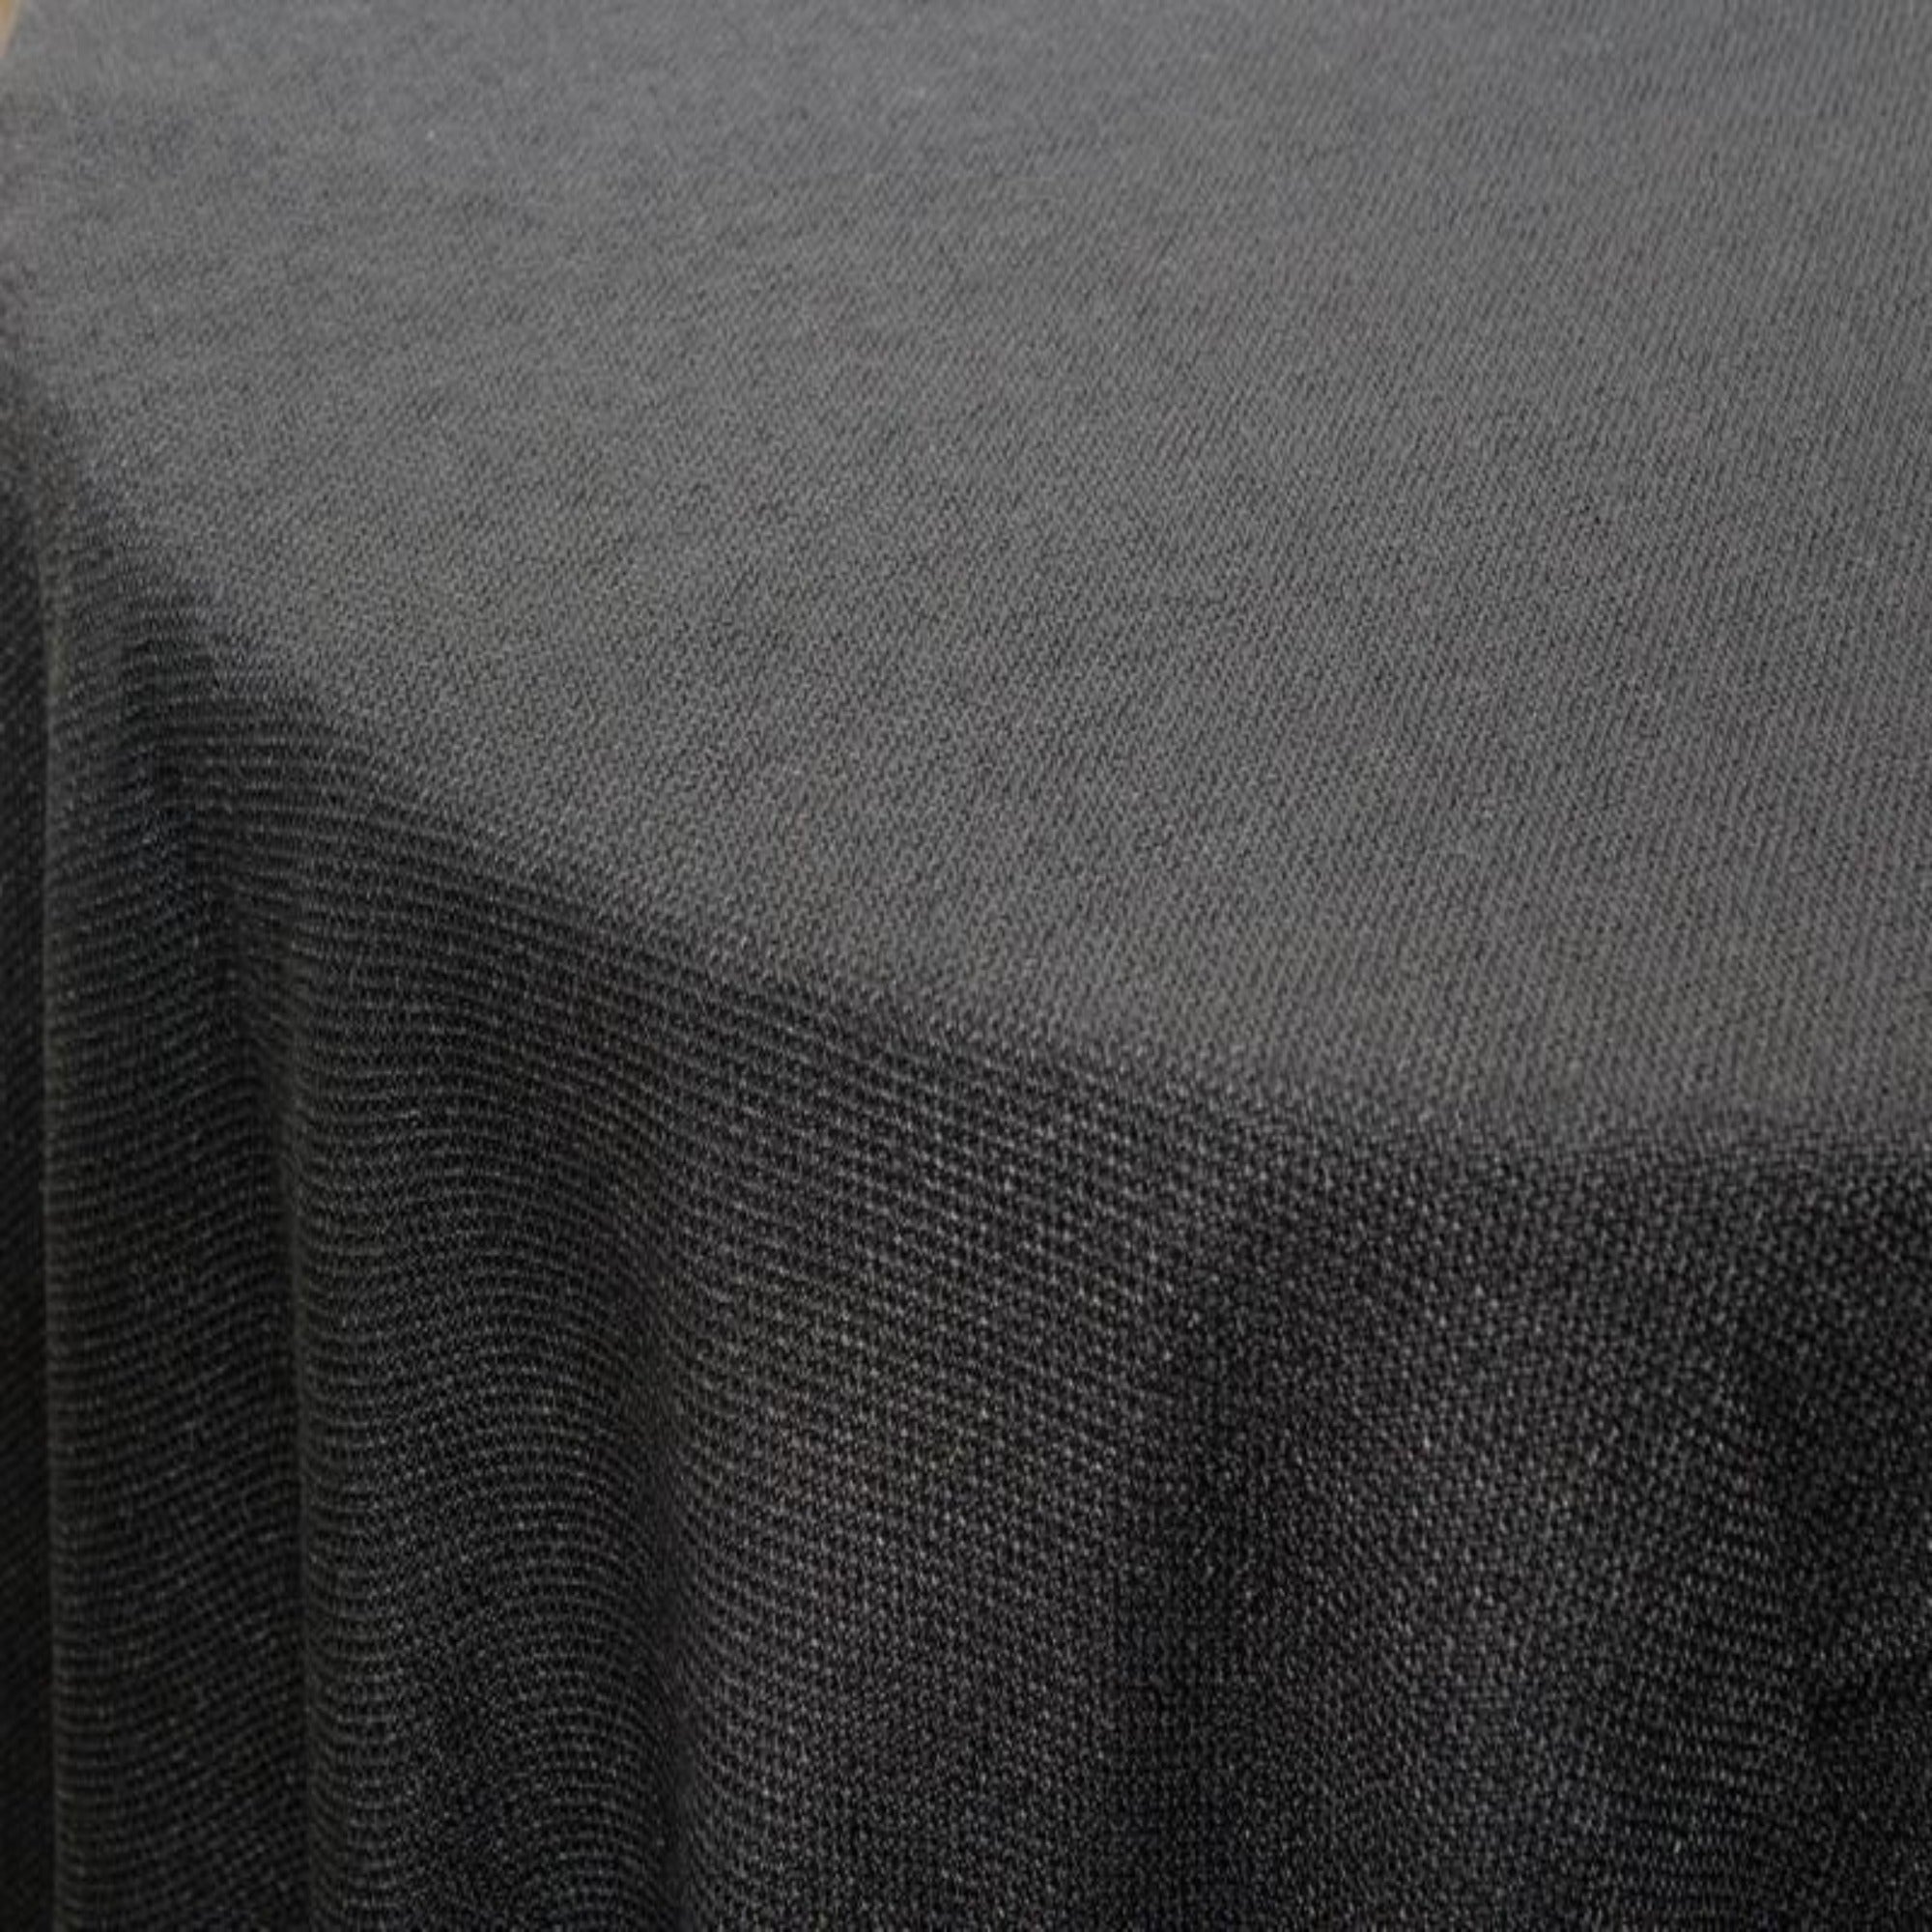 100% Acetate Fabric Rich Black Fabric Lining Fabric Fashion Fabric Interior  Fabric Clothing Fabric By The Metre Fabric Crafts Fabric